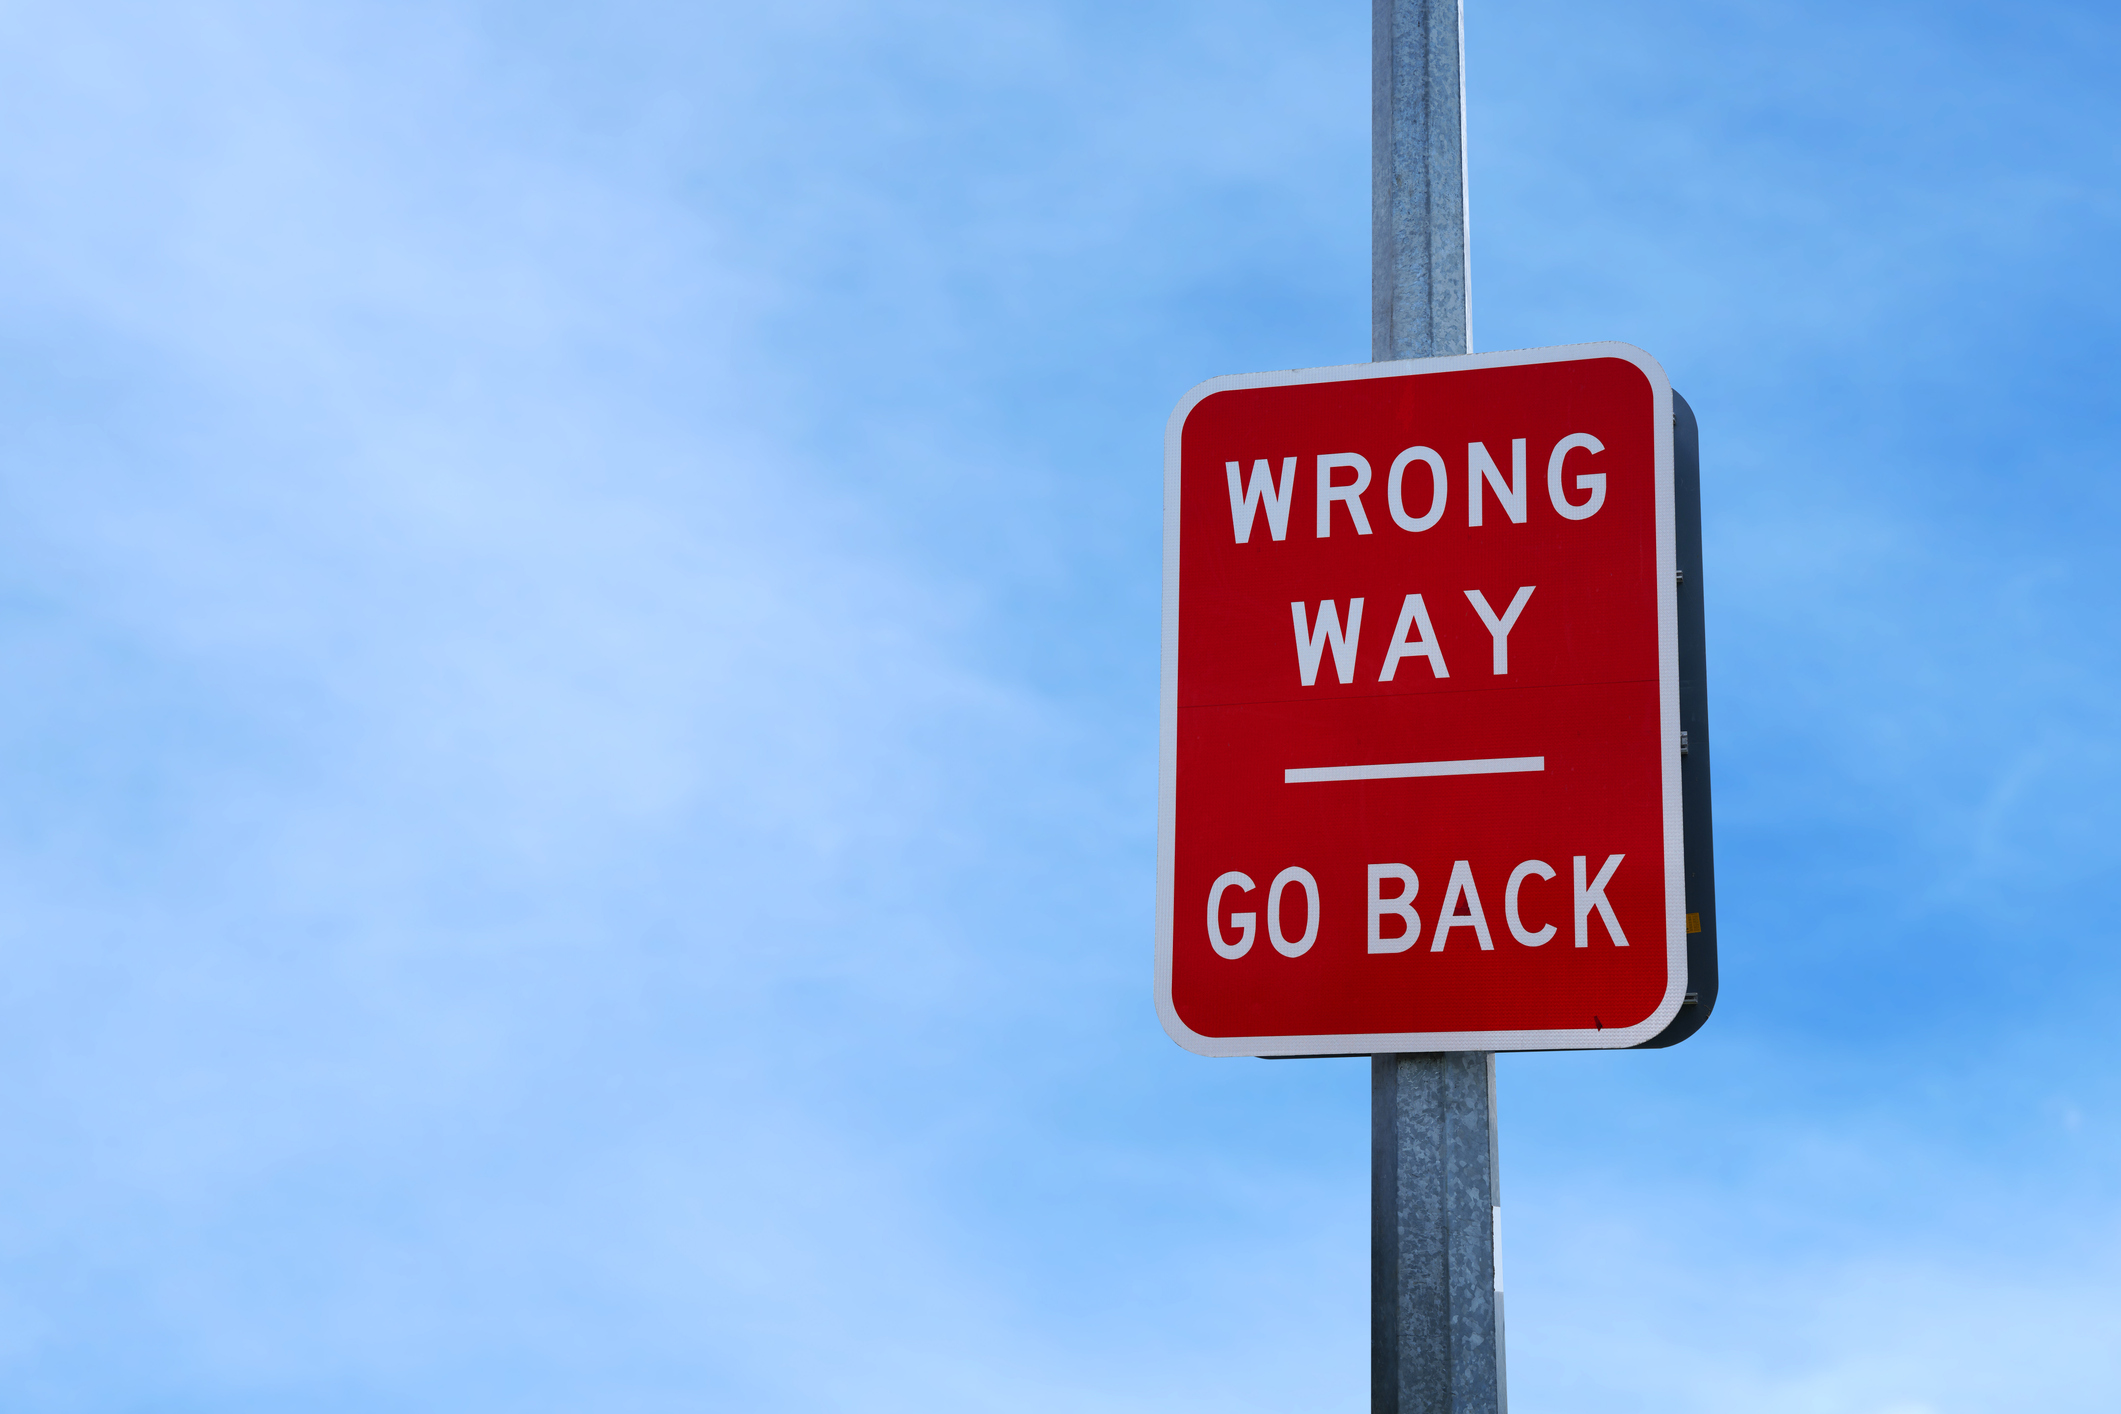 Red wrong way go back sign against a blue sky - learn lessons from your mistakes